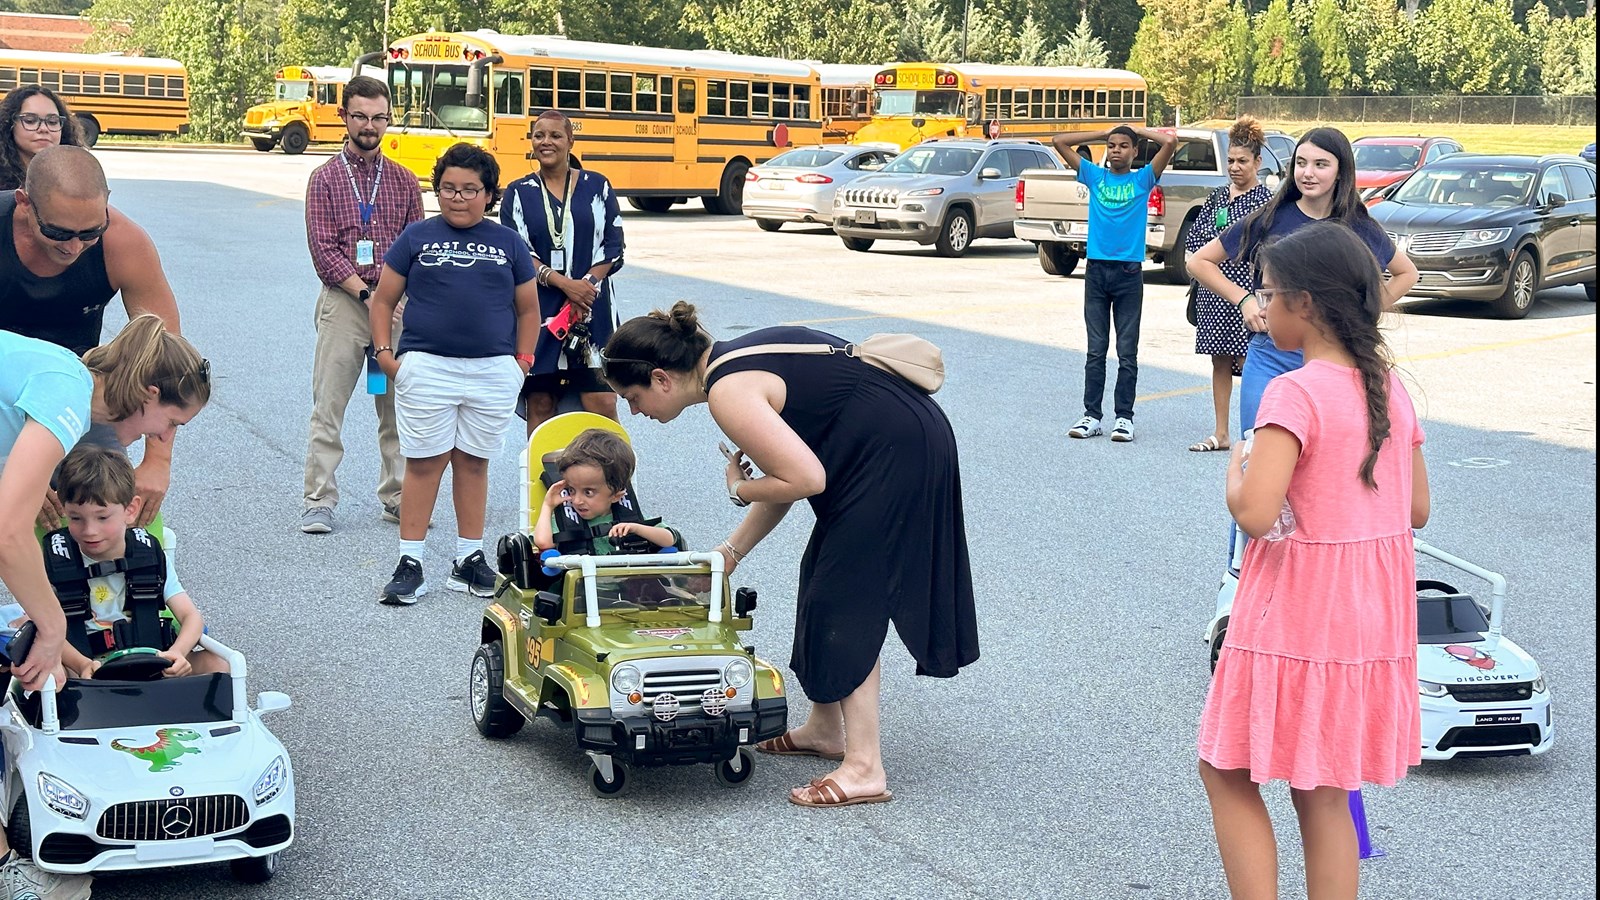 East Cobb Middle School club donates modified cars for students in need.